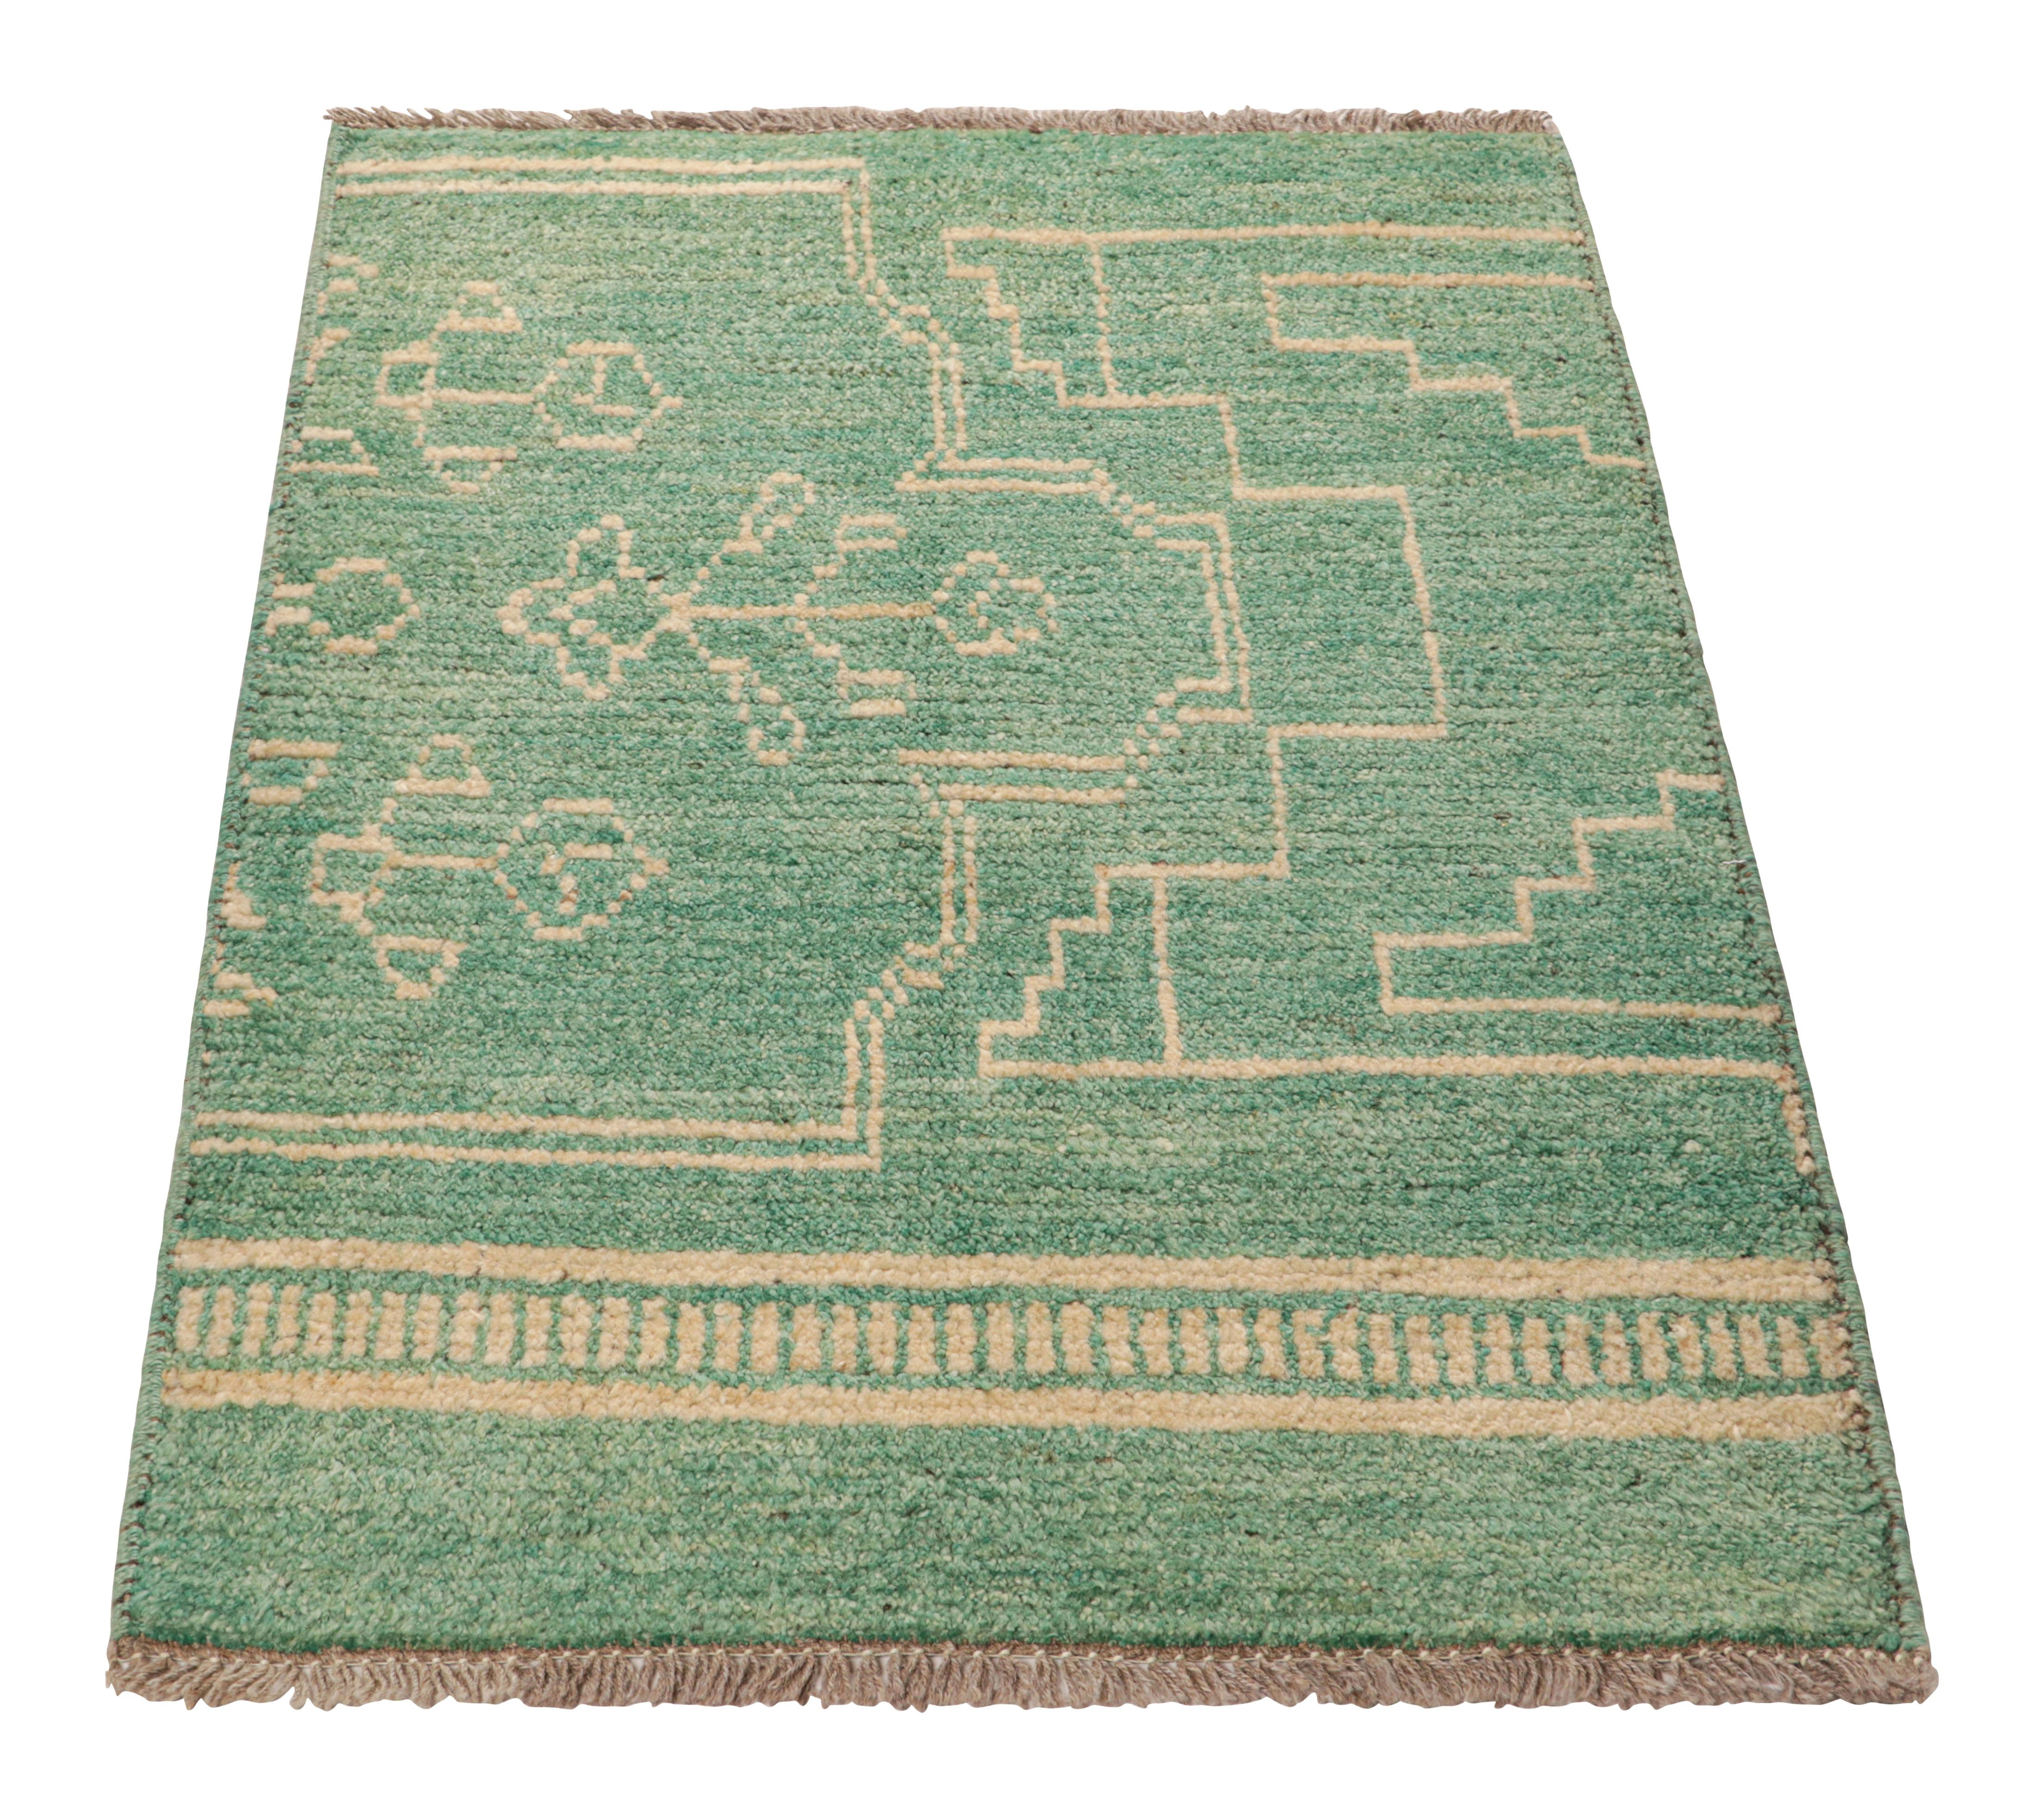 Rug & Kilim’s Moroccan Style Rug in Turquoise with Tribal Geometric Patterns In New Condition For Sale In Long Island City, NY